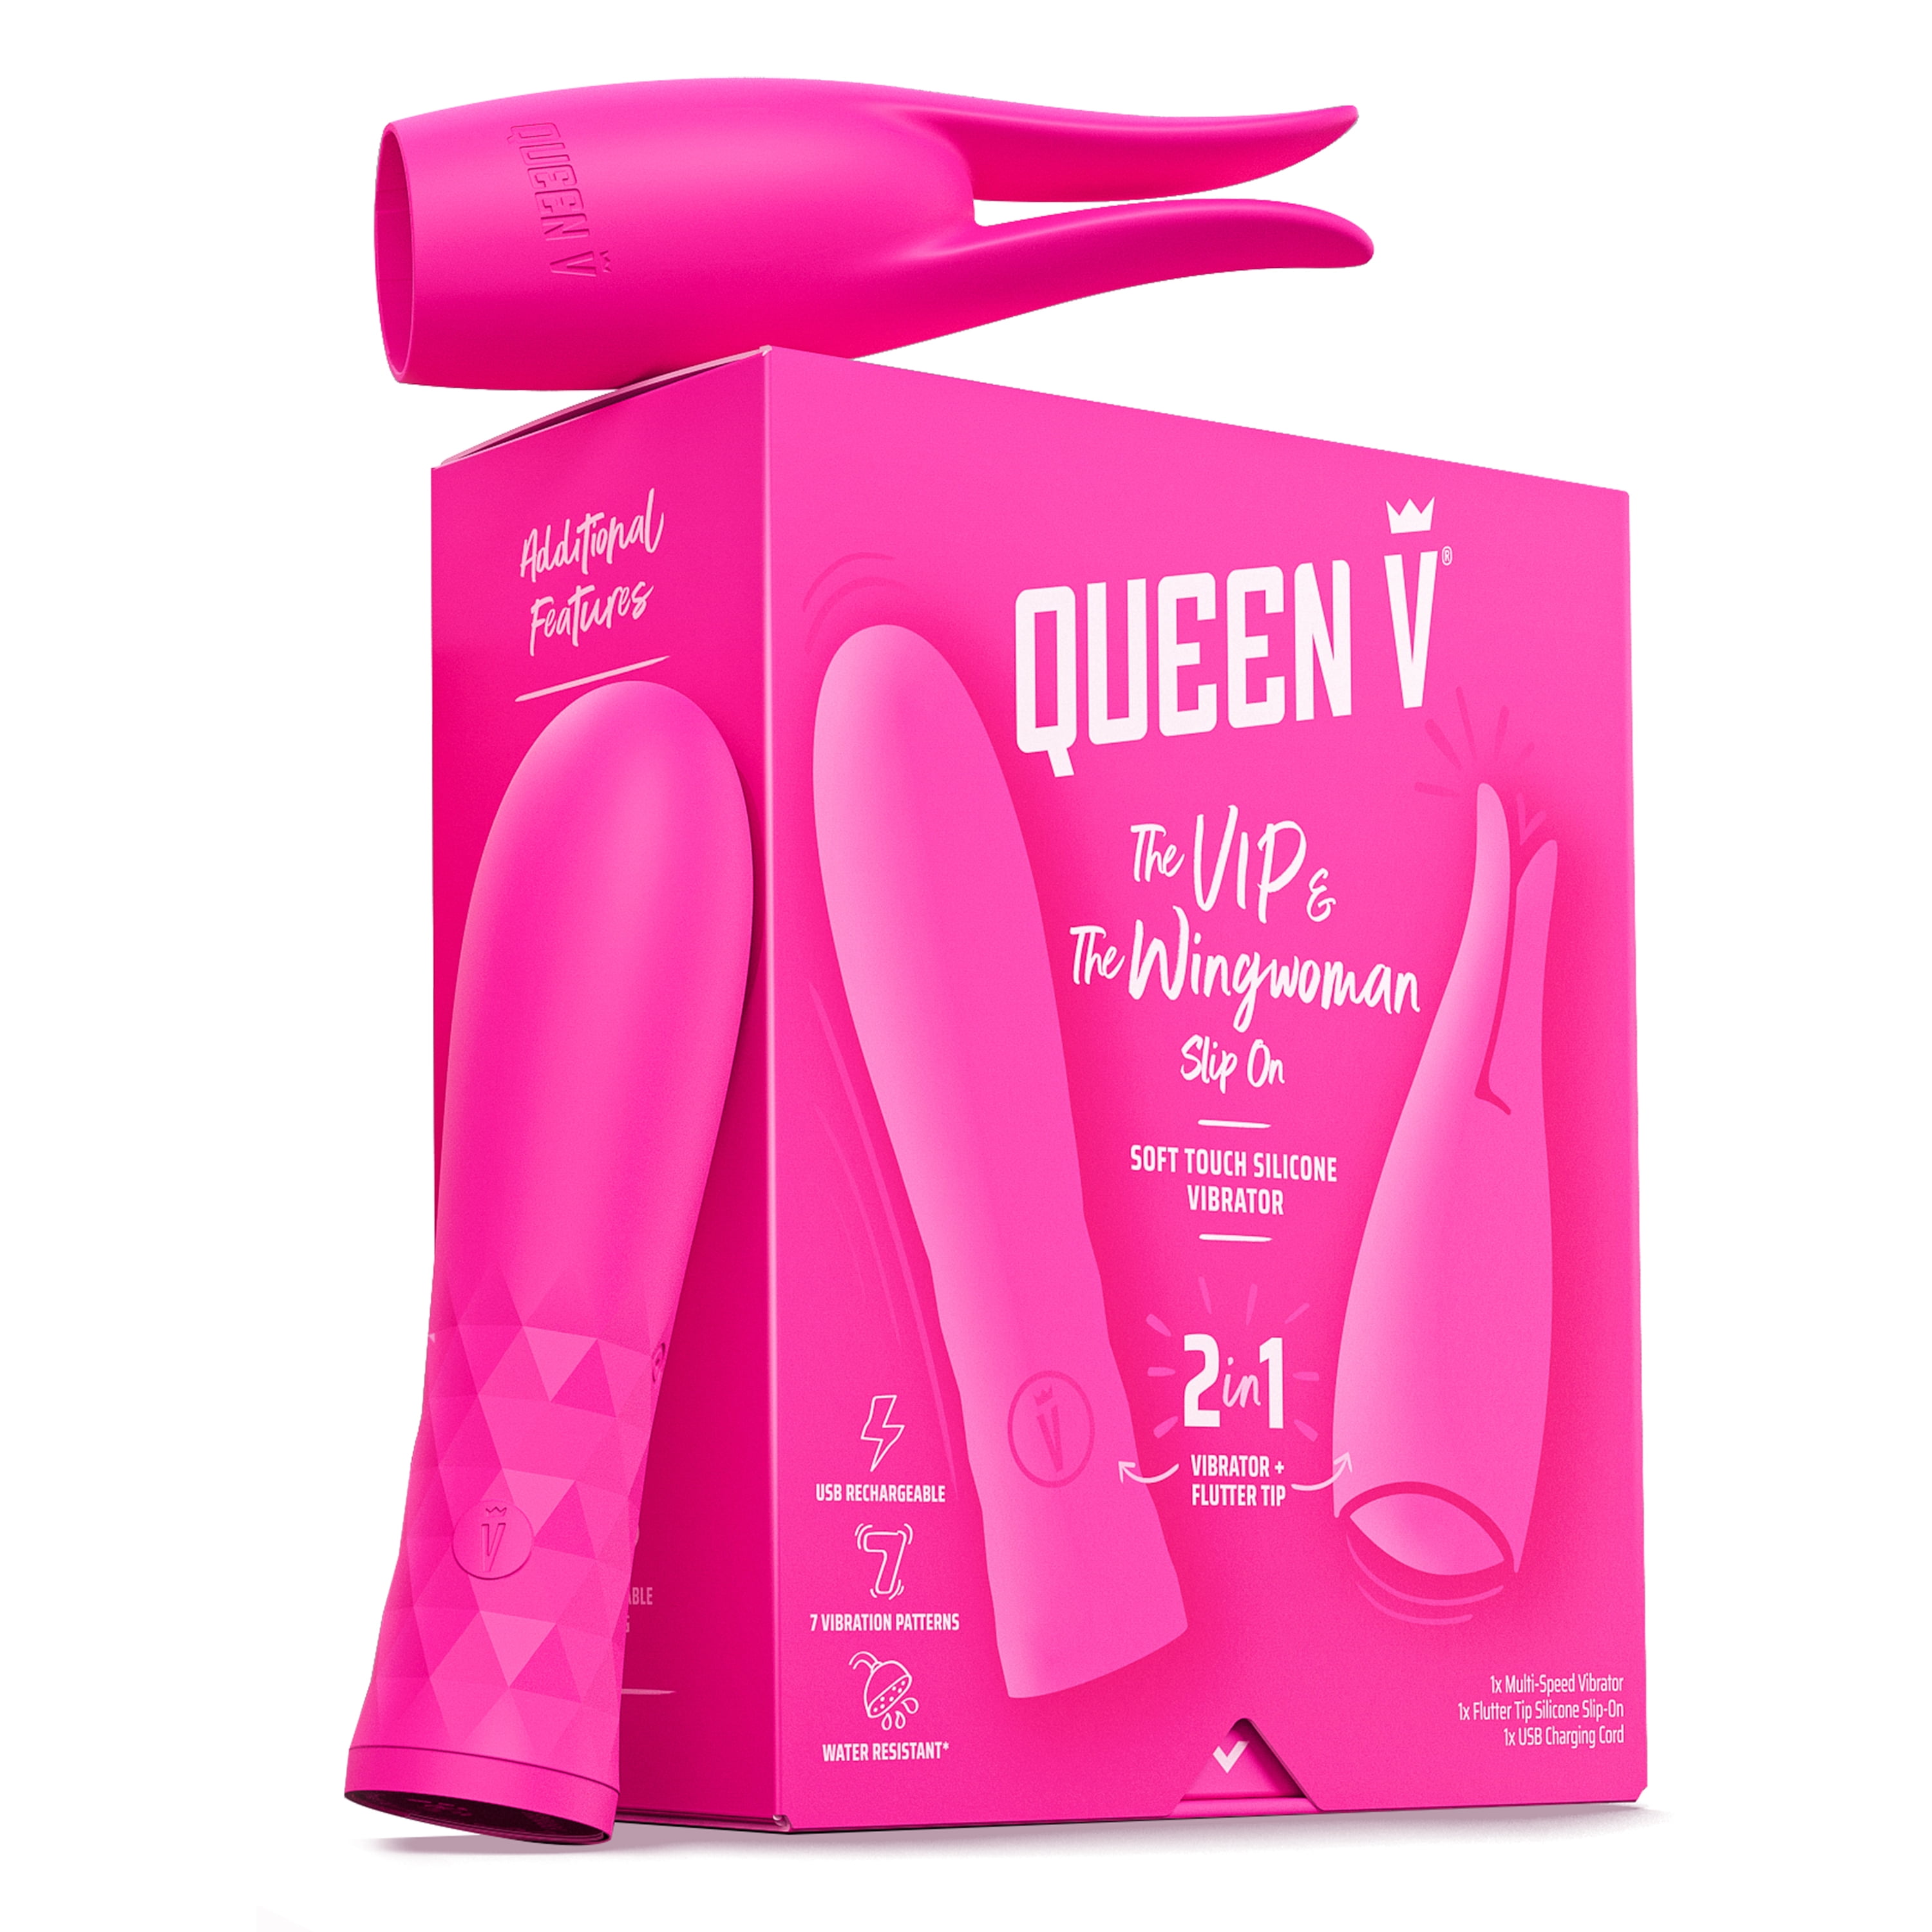 Queen V The VIP and The Wingwoman Slip On, Adult Sex Toy for Woman, 2 in 1 Multi-Speed Vibrator + Flutter Tip Slip On, USB Rechargeable, Water Resistant, Soft Touch Silicone Personal photo